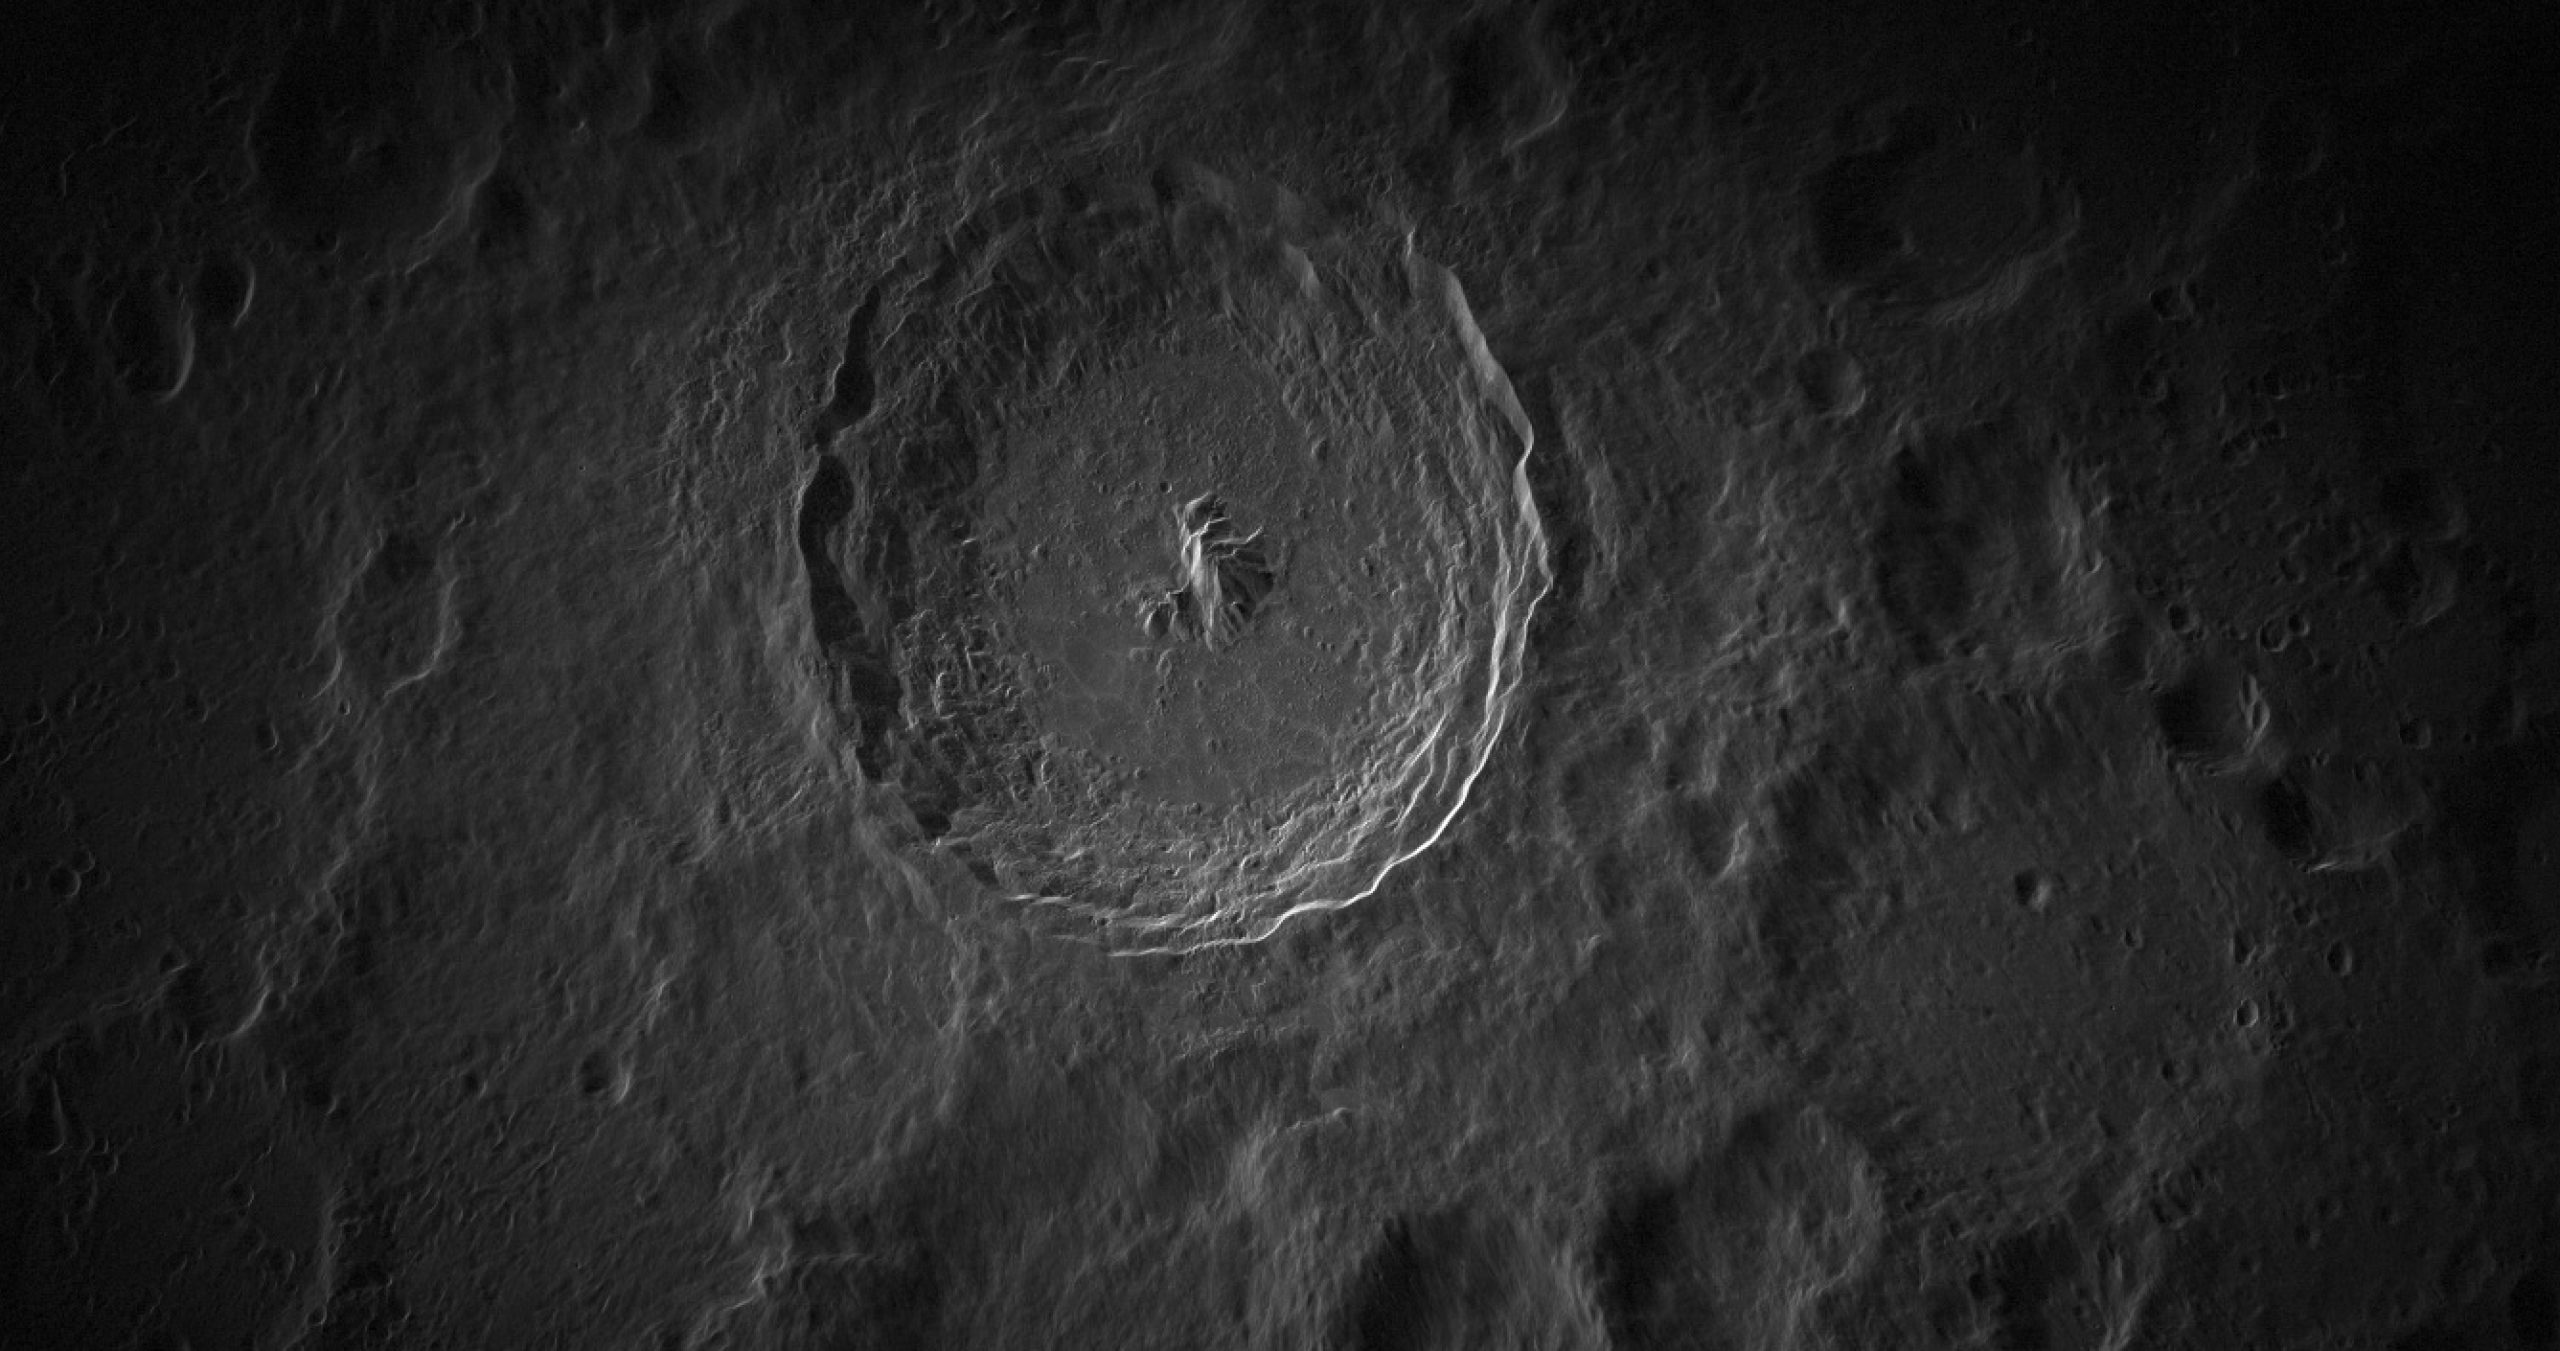 A Synthetic Aperture Radar image of the Moon’s Tycho Crater. Image Credit: Green Bank Observatory.